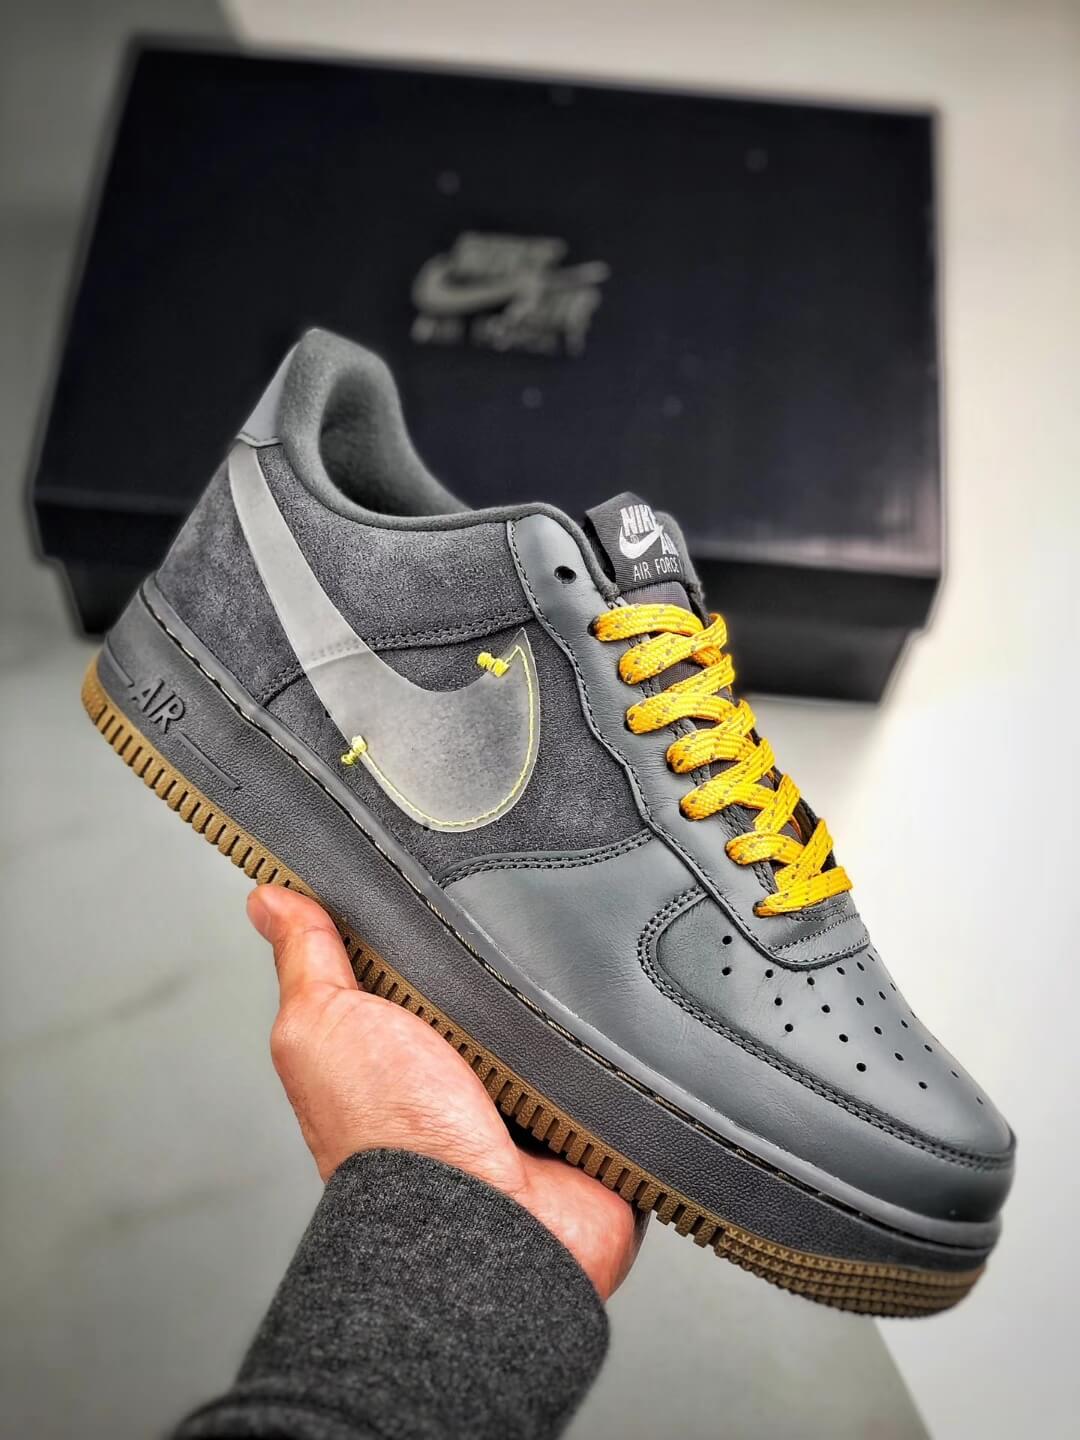 The Nike Air Force 1 Low Cool Grey Reflective Shoelace Top Quality RepShoes 01